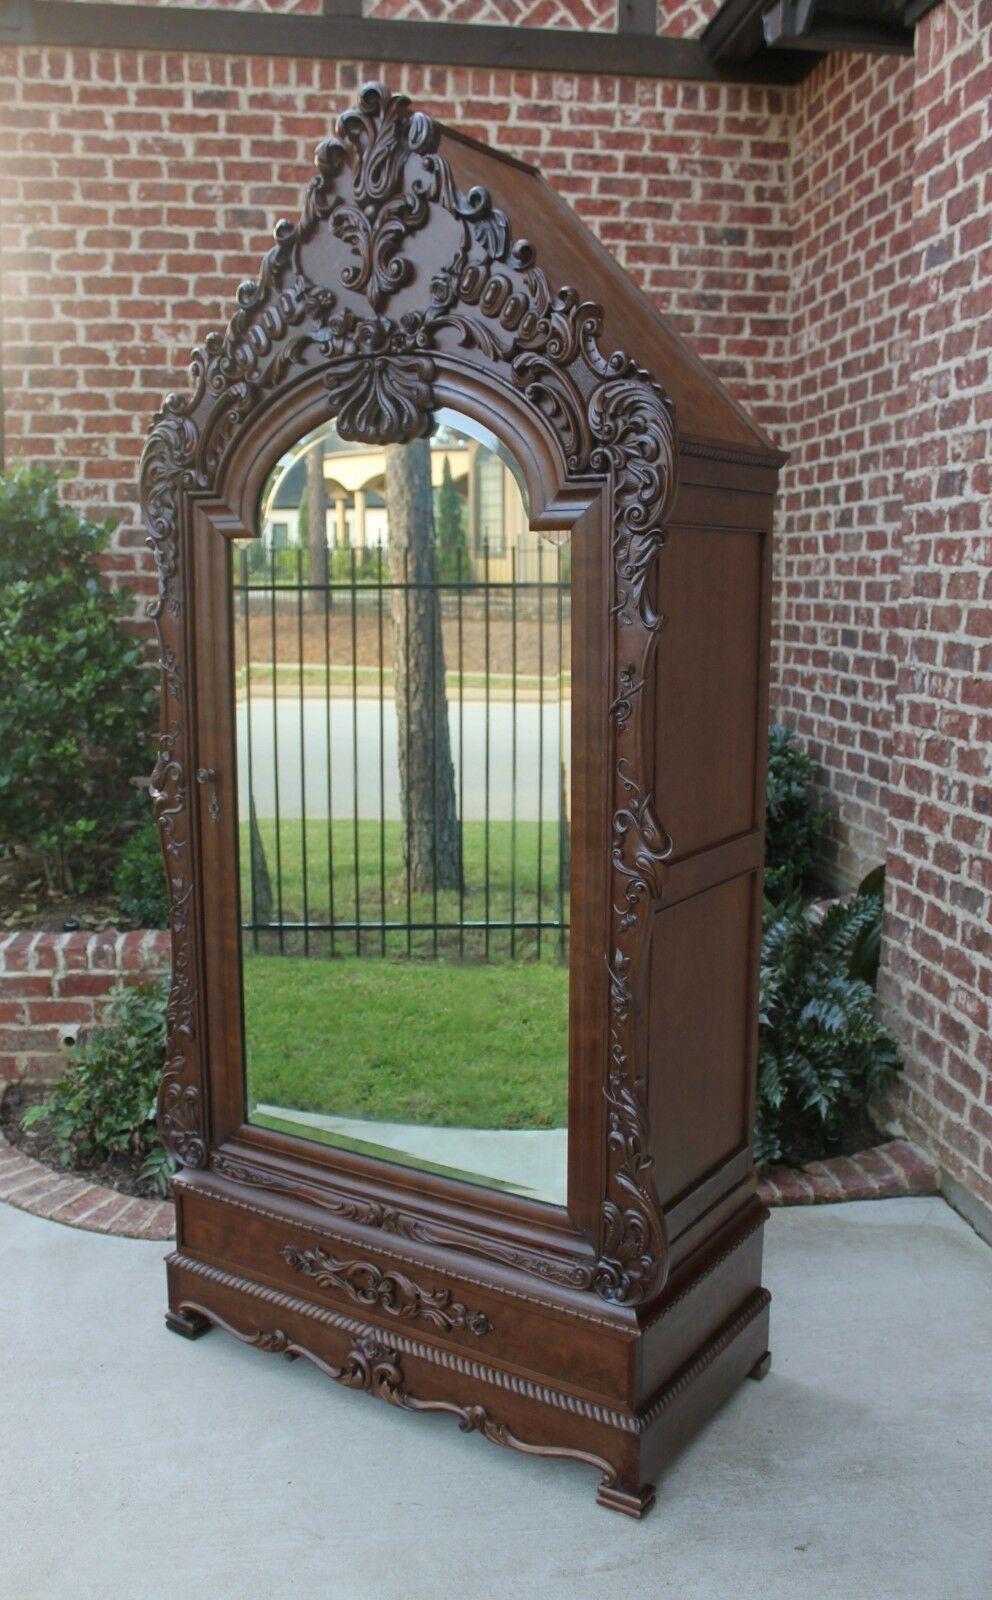 Stunning antique Italian walnut on oak rococo revival mirrored wardrobe, Armoire, linen closet/cabinet~~c. 1890s

 Beautifully carved gabled crown with ornate floral and foliate carvings

Rope trim with beveled mirrored door

Interior cabinet